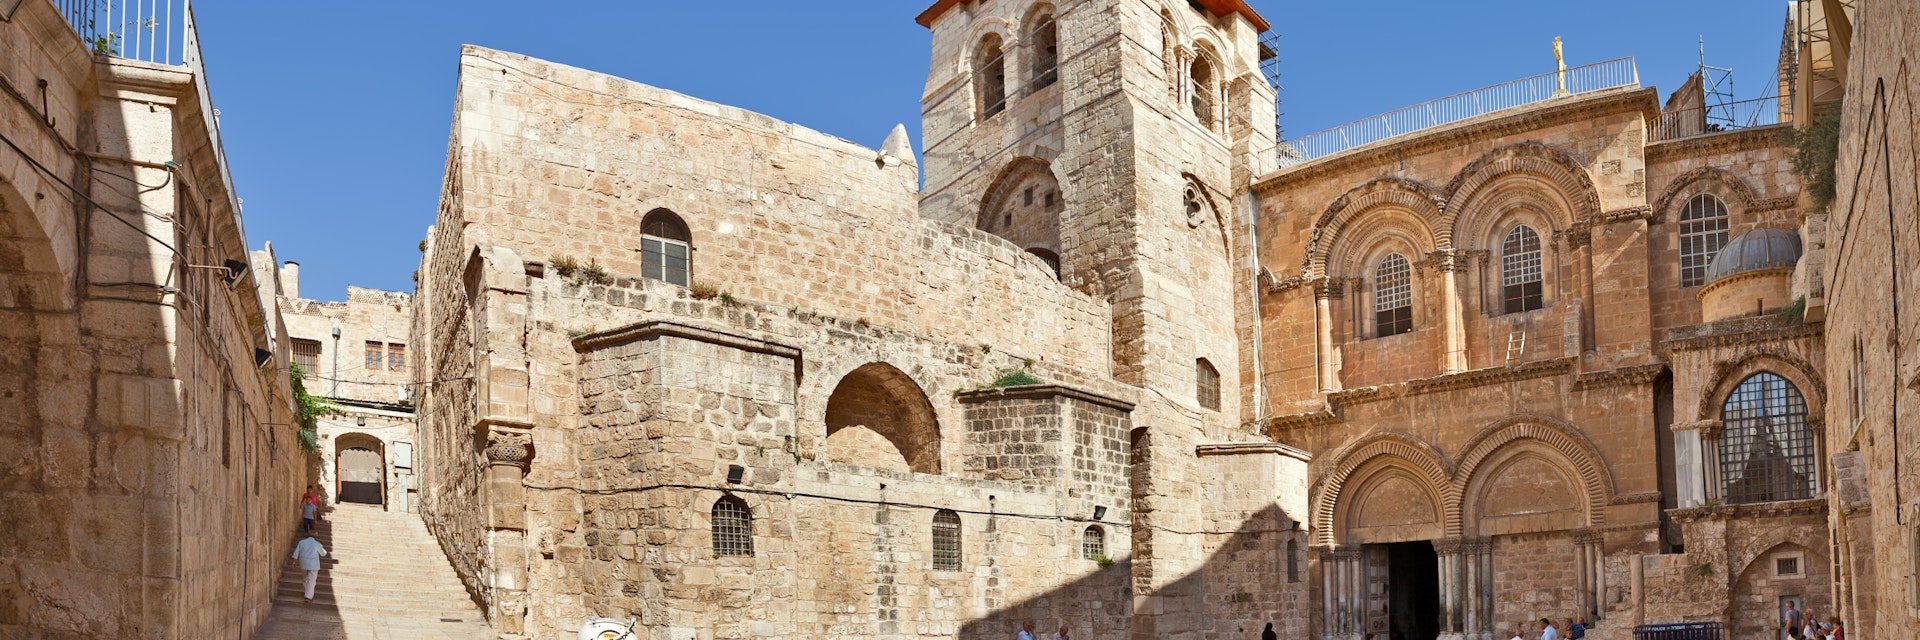 Jerusalem, Israel - July 26, 2015: Panorama of the Church of the Holy Sepulchre  - church in Christian Quarter of the Old City of Jerusalem where Jesus was crucified, buried and resurrected.